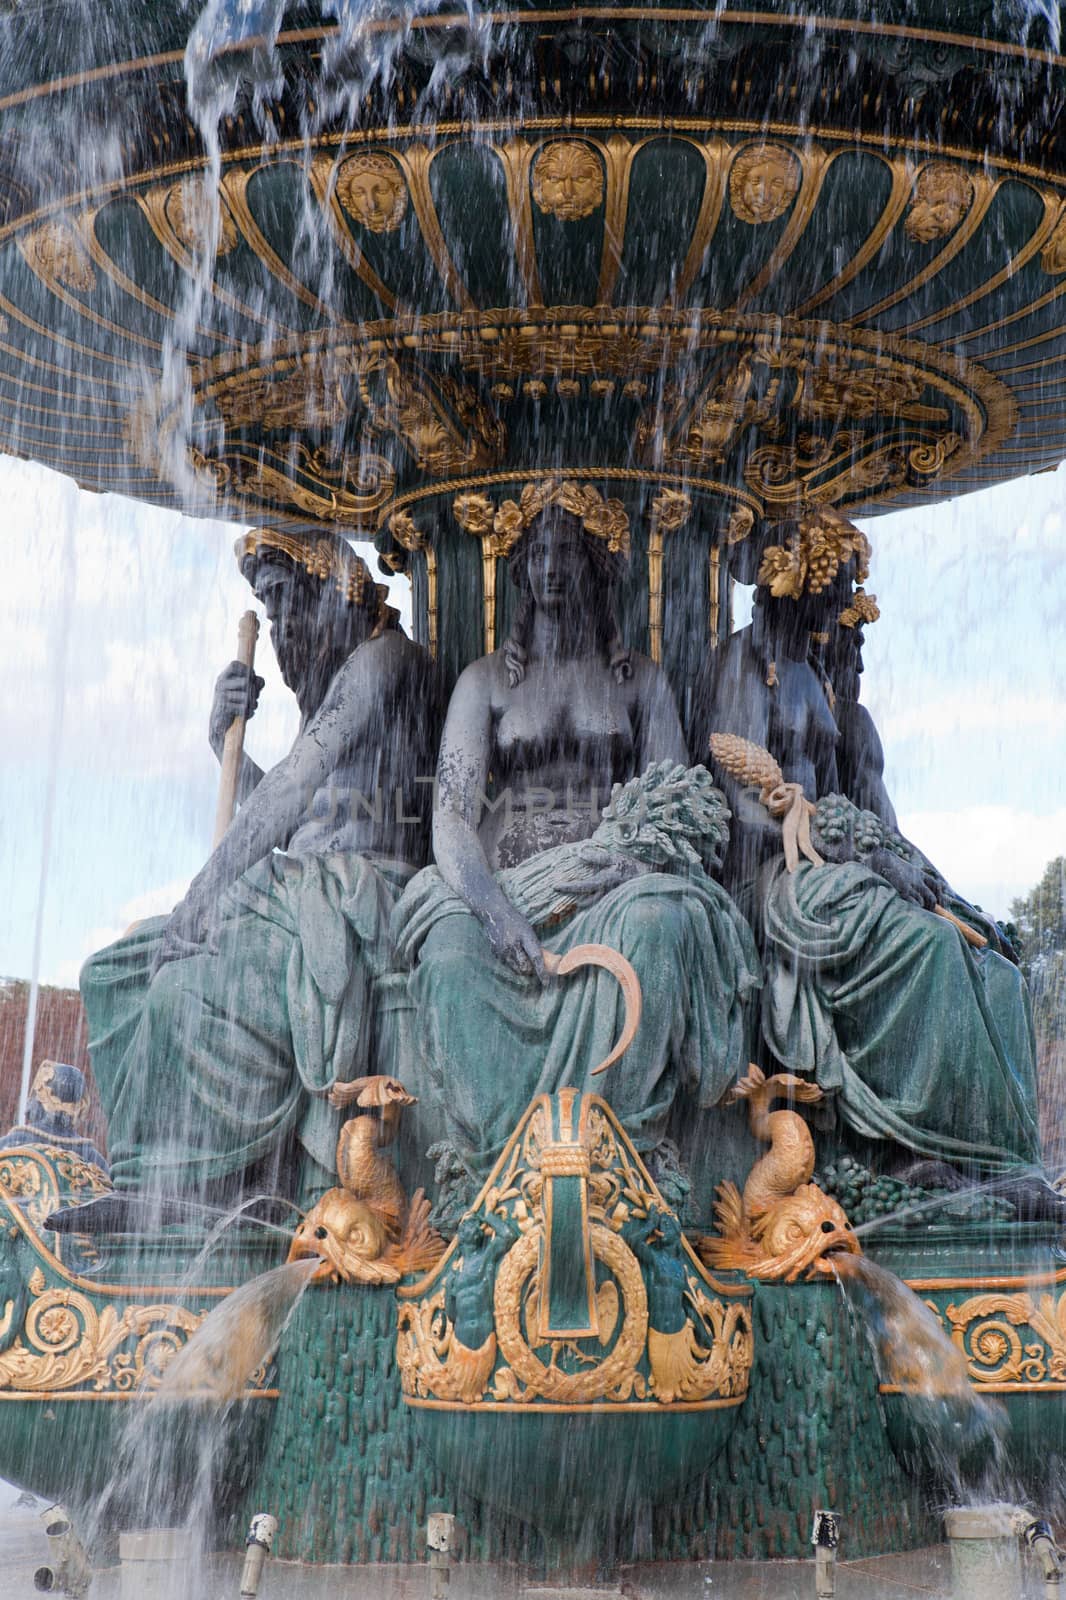 Landmark famous sculptural fountain of River Commerce and Navigation on the Place de la Concorde in Paris France on the cloudy sky background